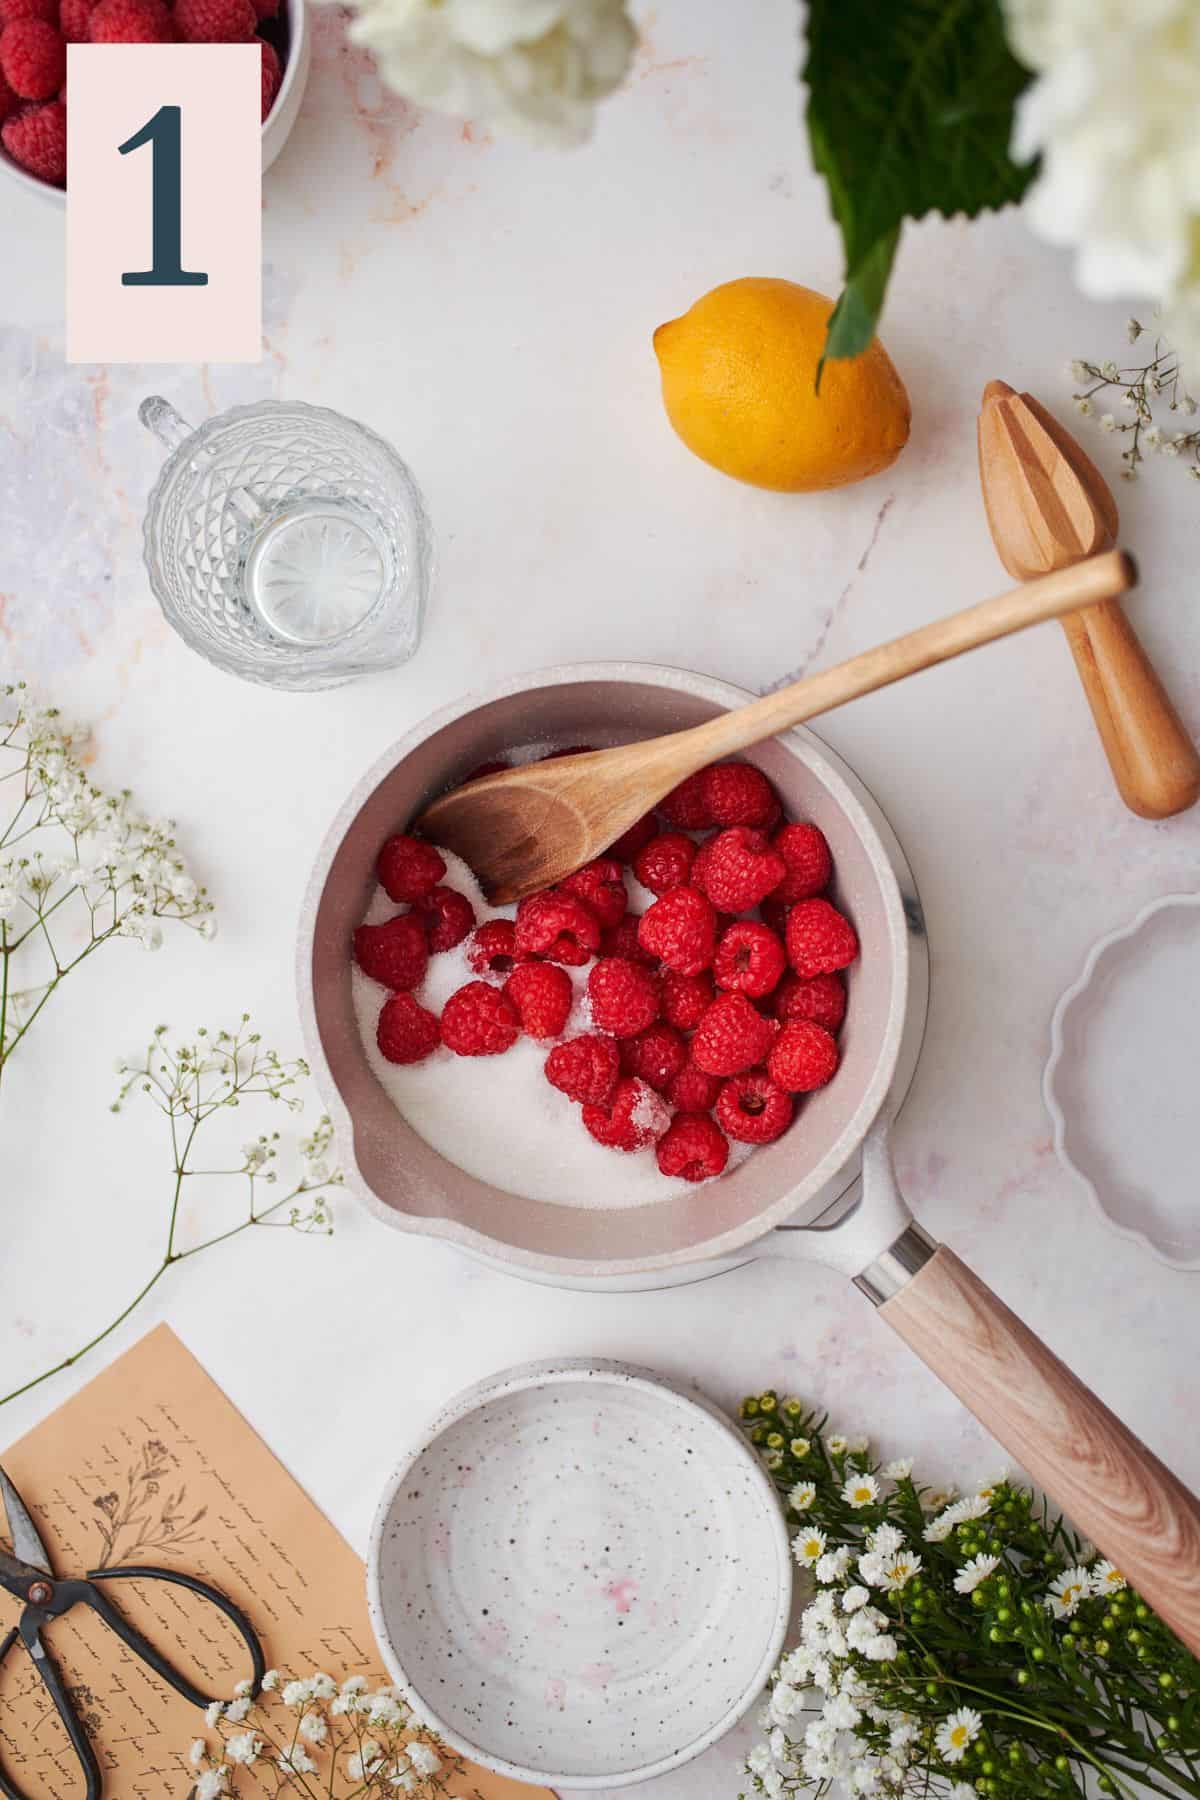 raspberries and sugar in a small sauce pan, surrounded by glassware, flowers, lemon, and water.